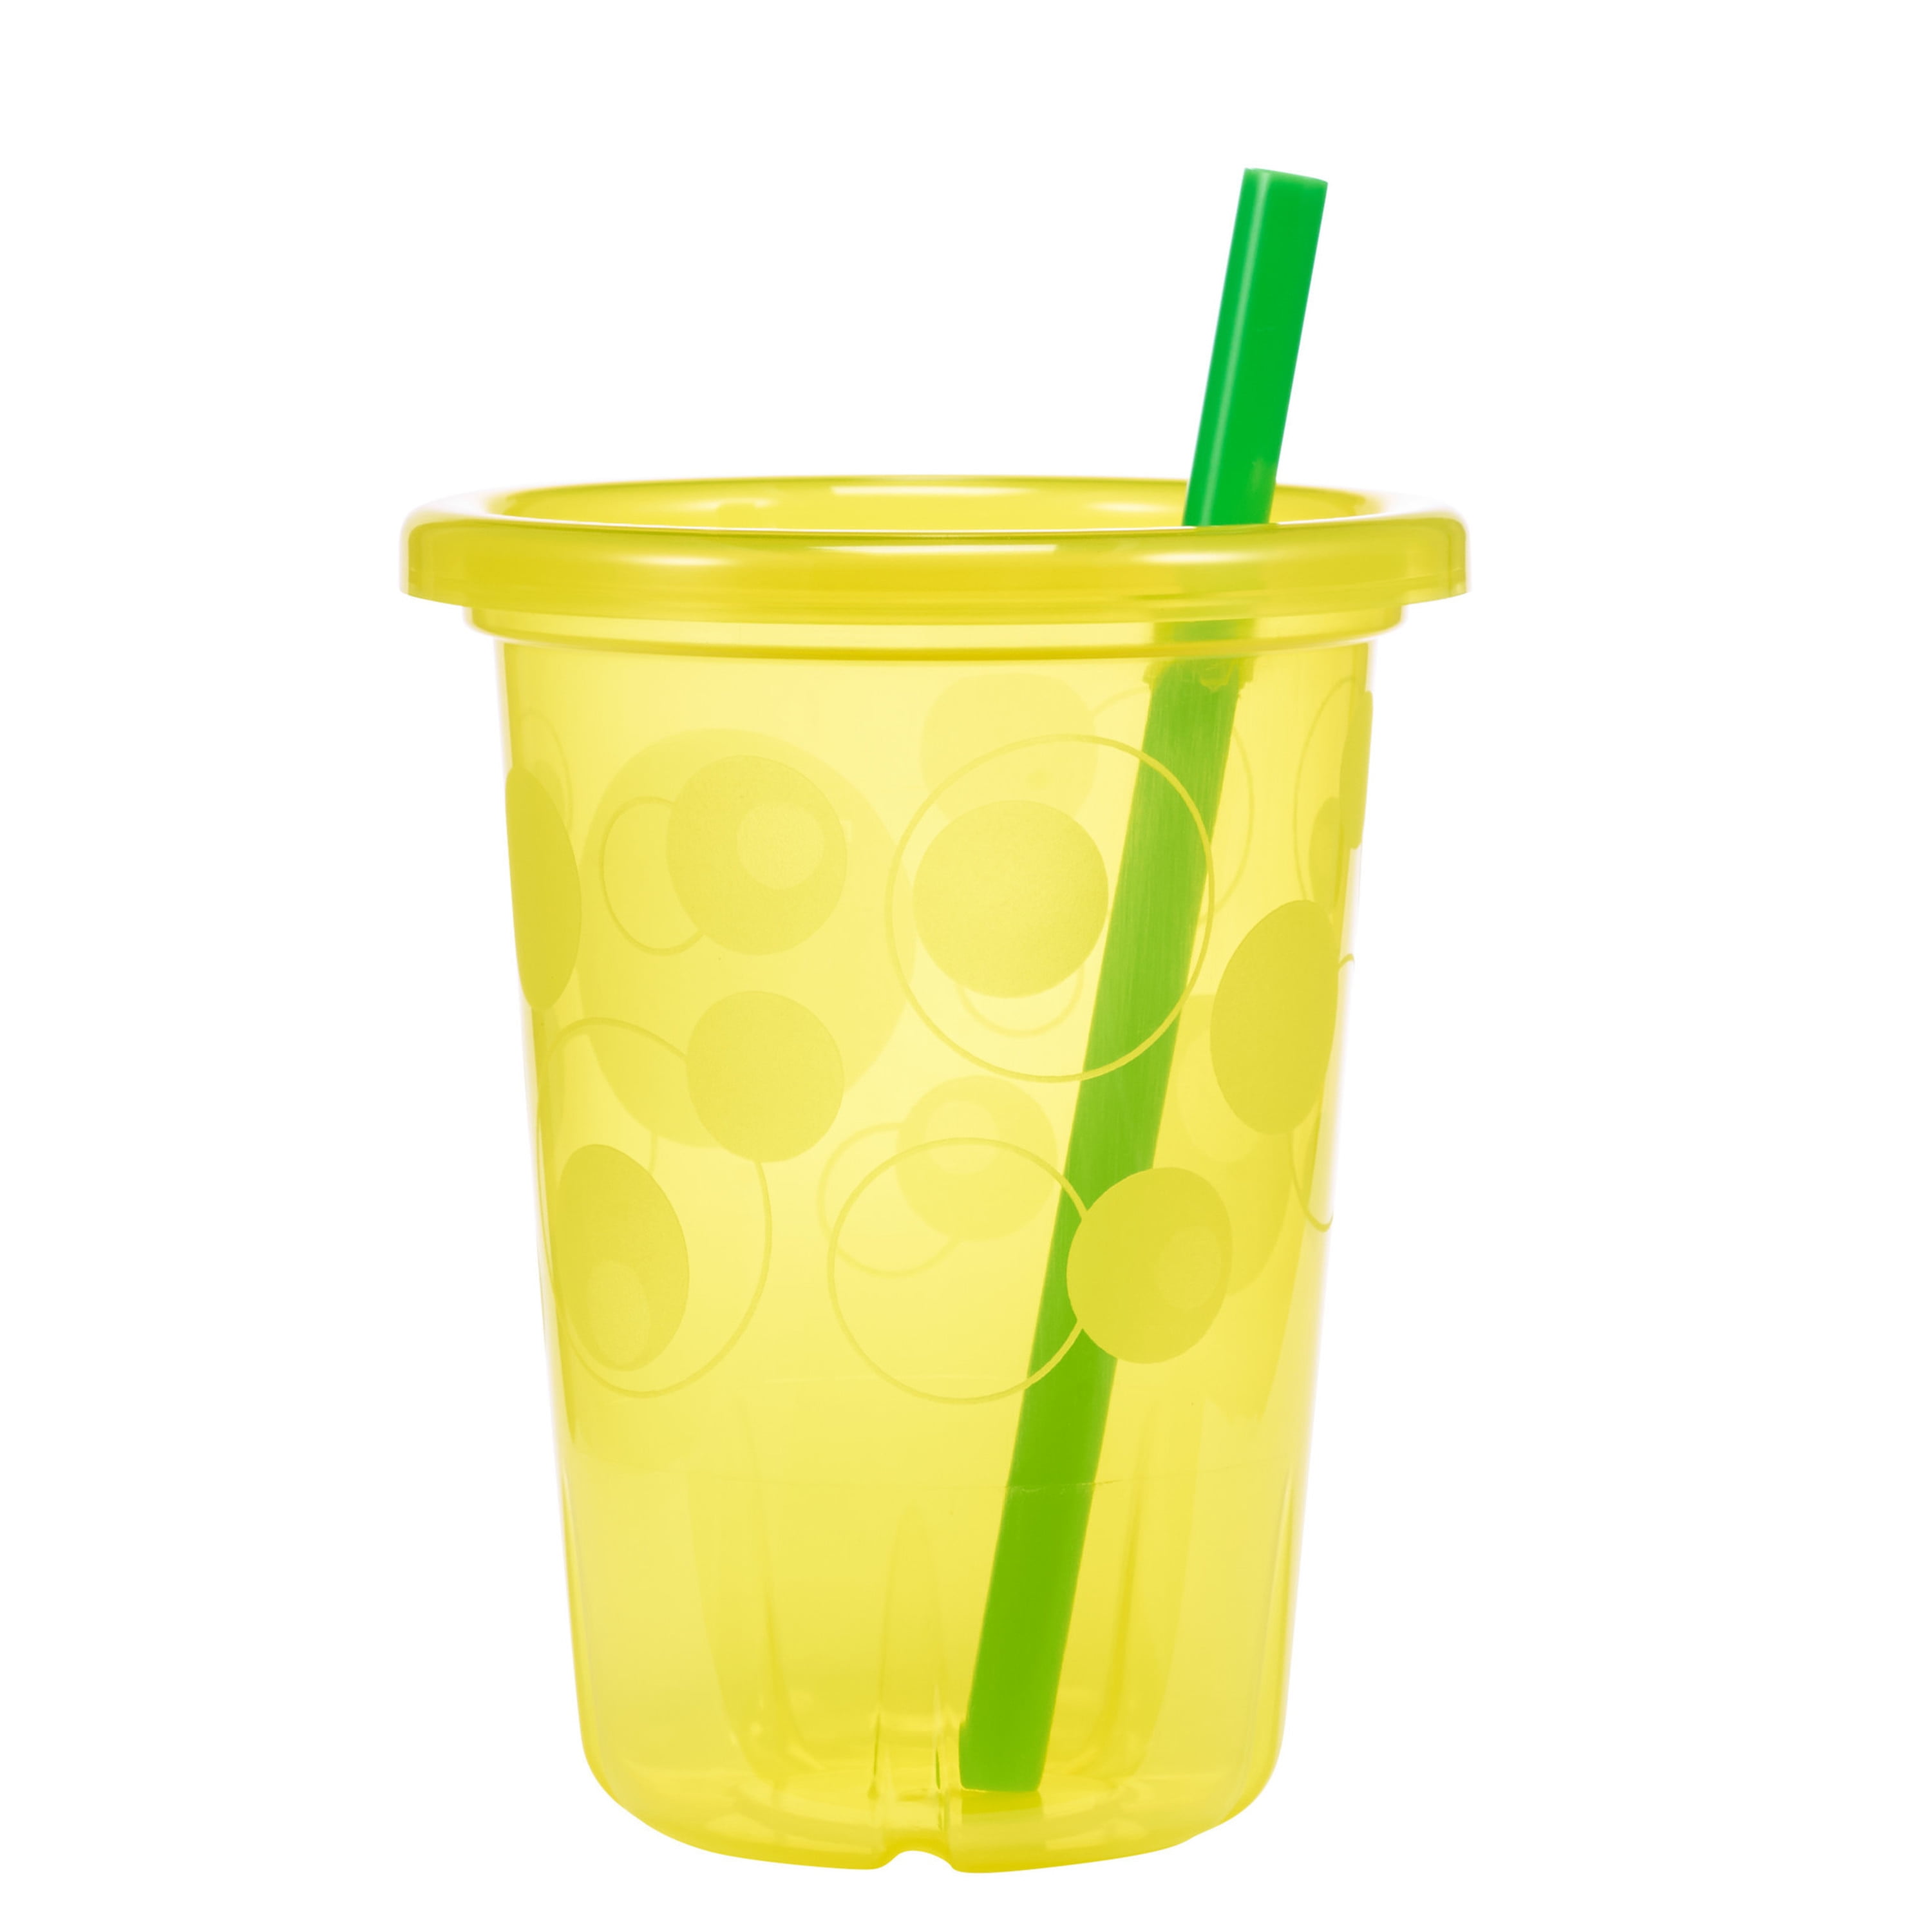 The First Years GreenGrown Reusable Spill-Proof Straw Cups - Toddler Cups with Straw - Blue/Yellow/Green - 6 Count